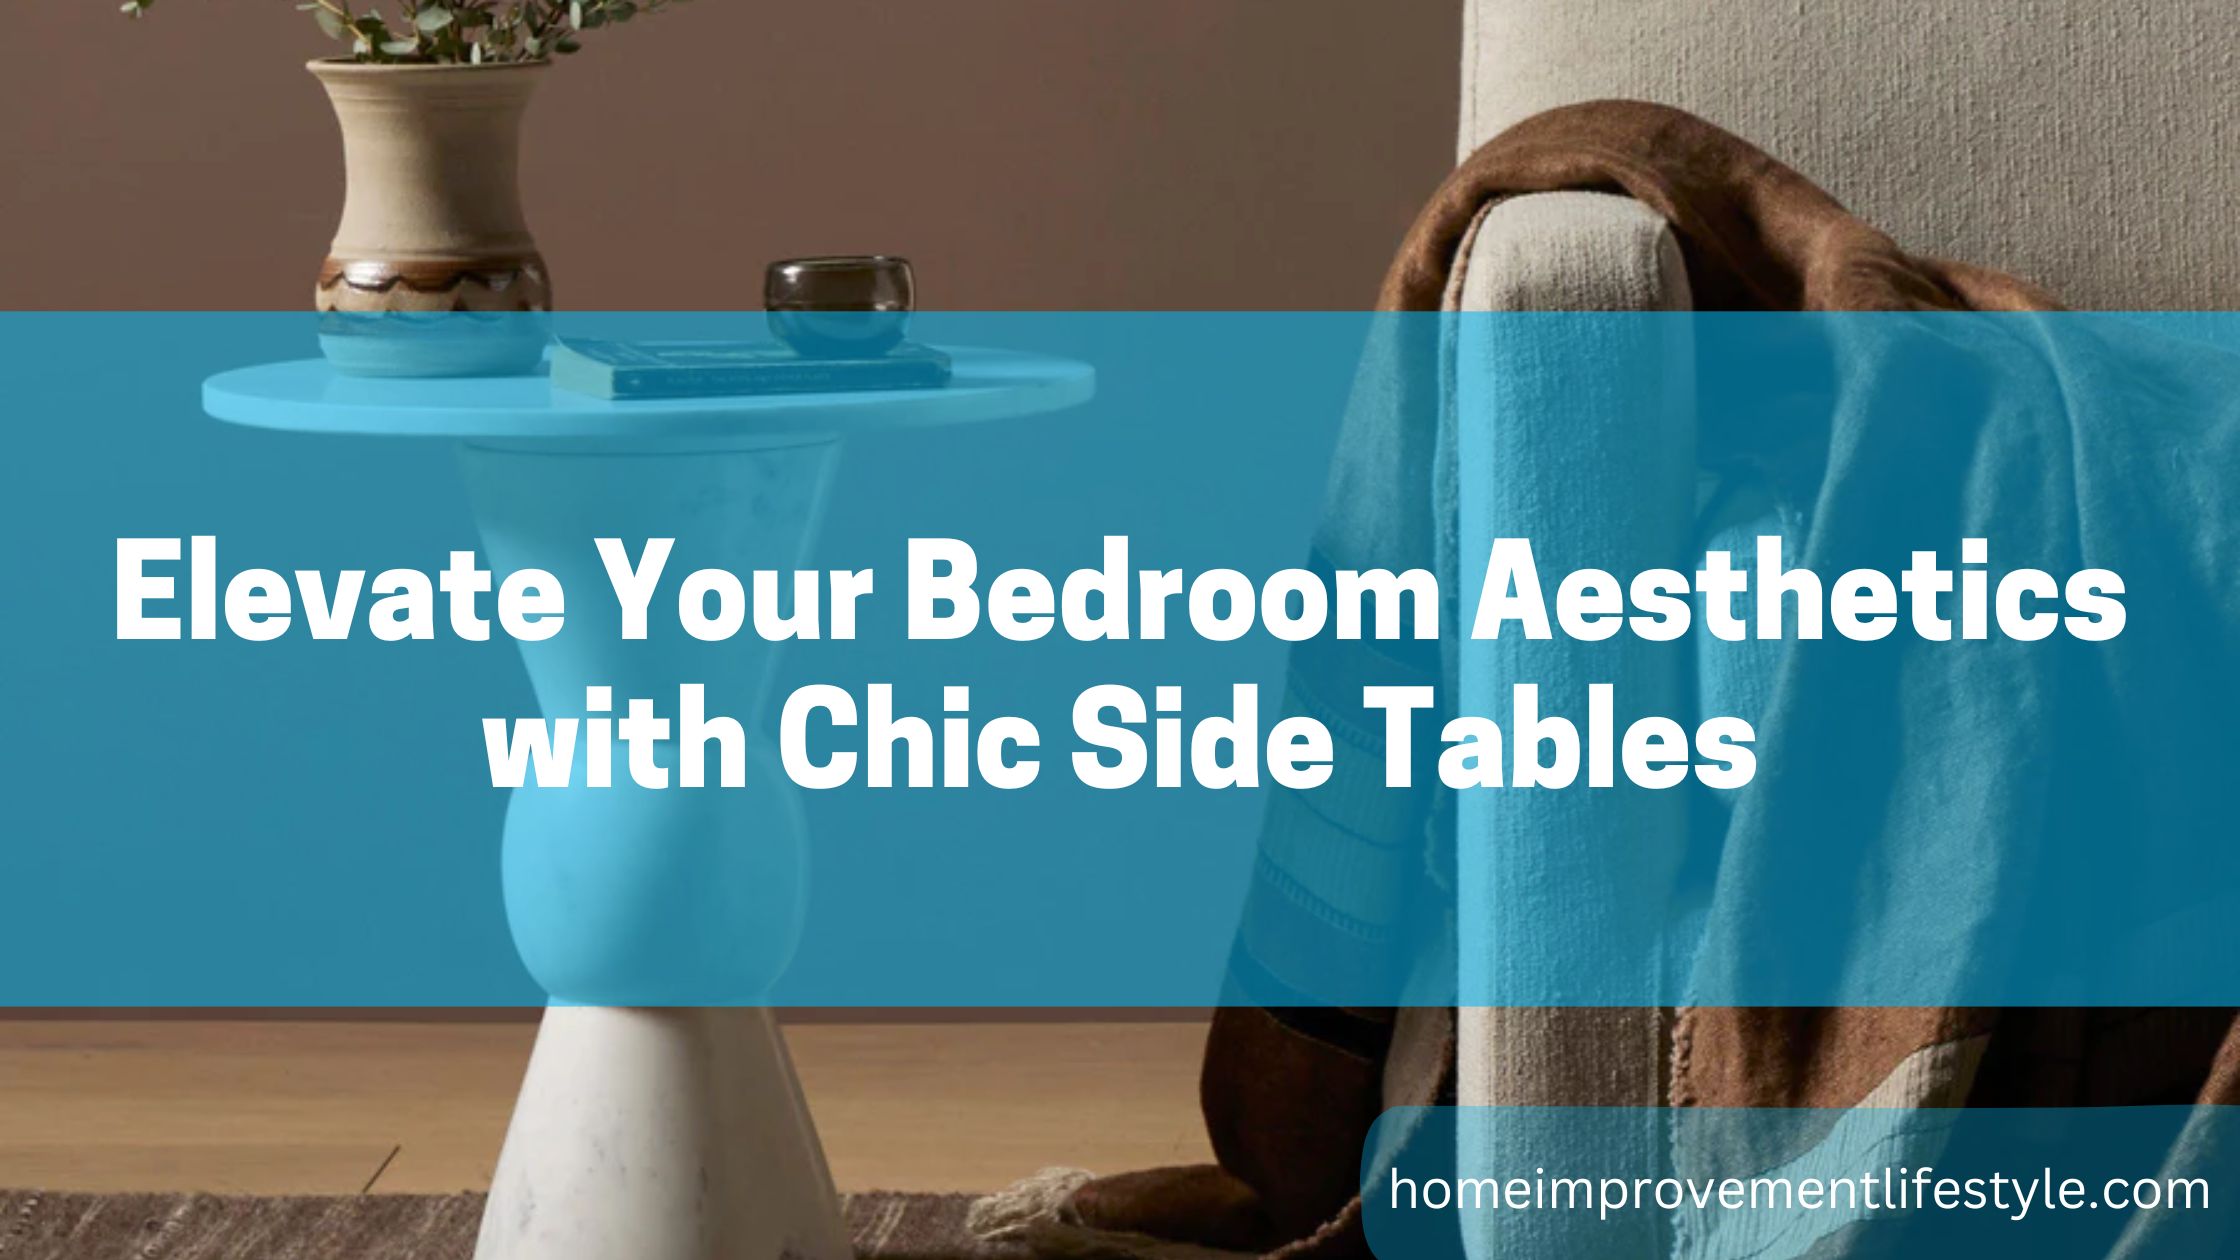 Elevate Your Bedroom Aesthetics with Chic Side Tables